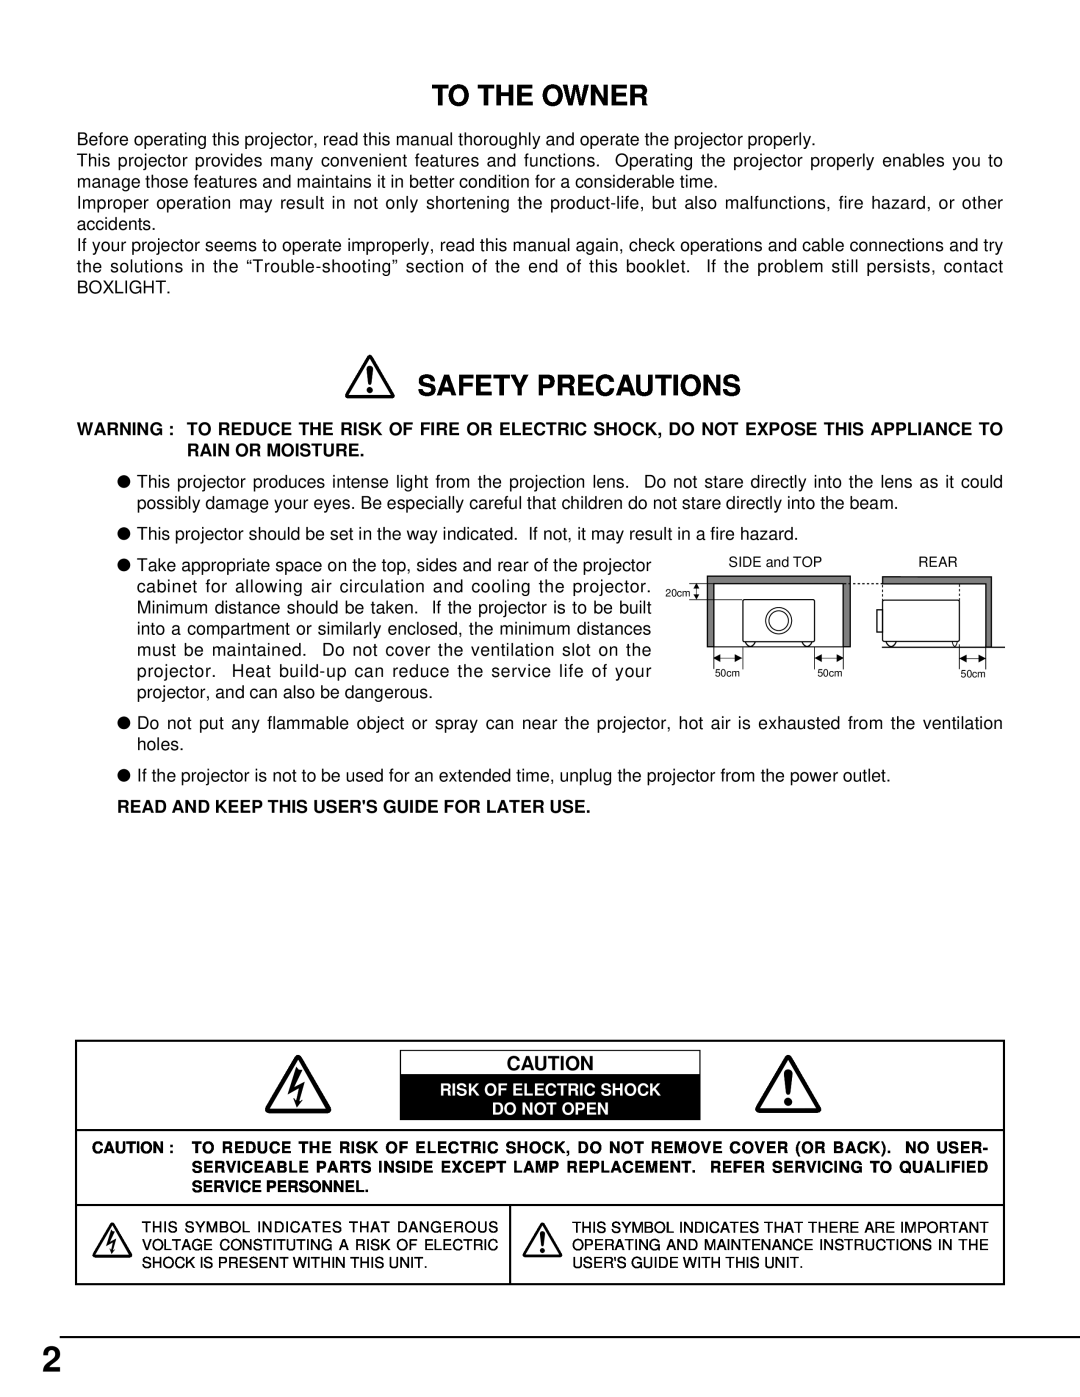 BOXLIGHT CINEMA 20HD manual To The Owner, Safety Precautions, Read And Keep This Users Guide For Later Use 